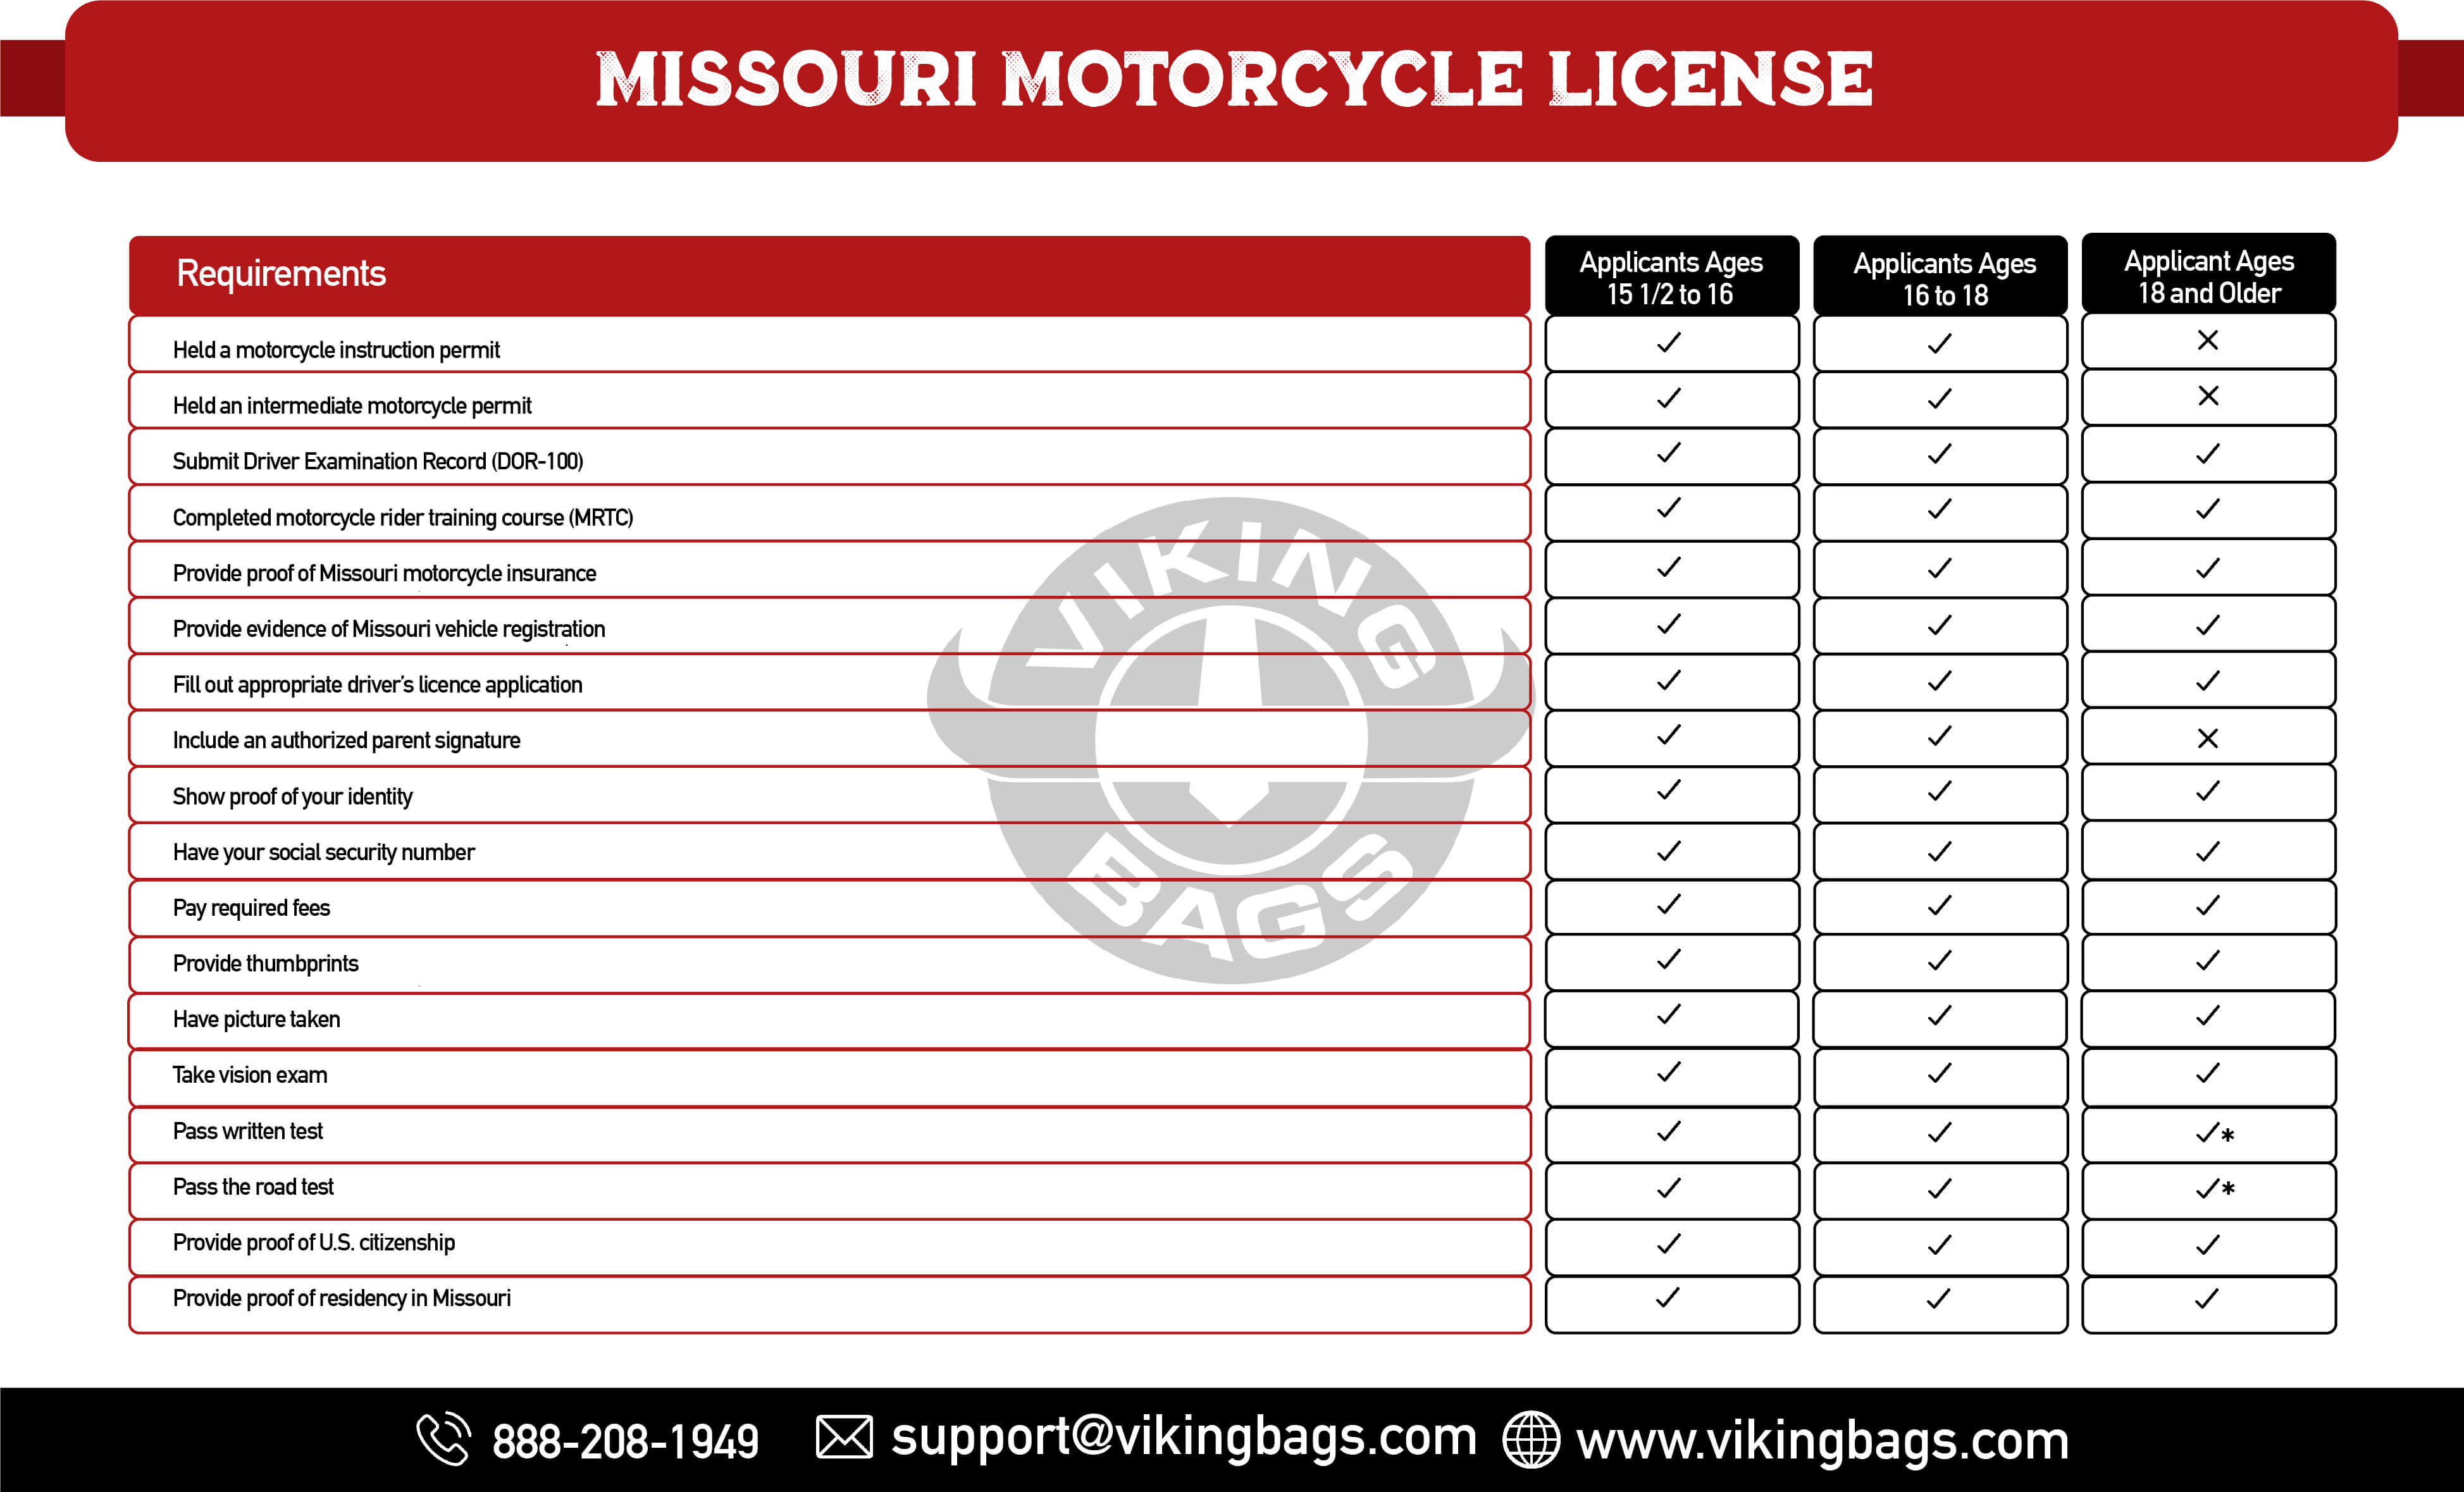 Requirements for Applying for Missouri Motorcycle License